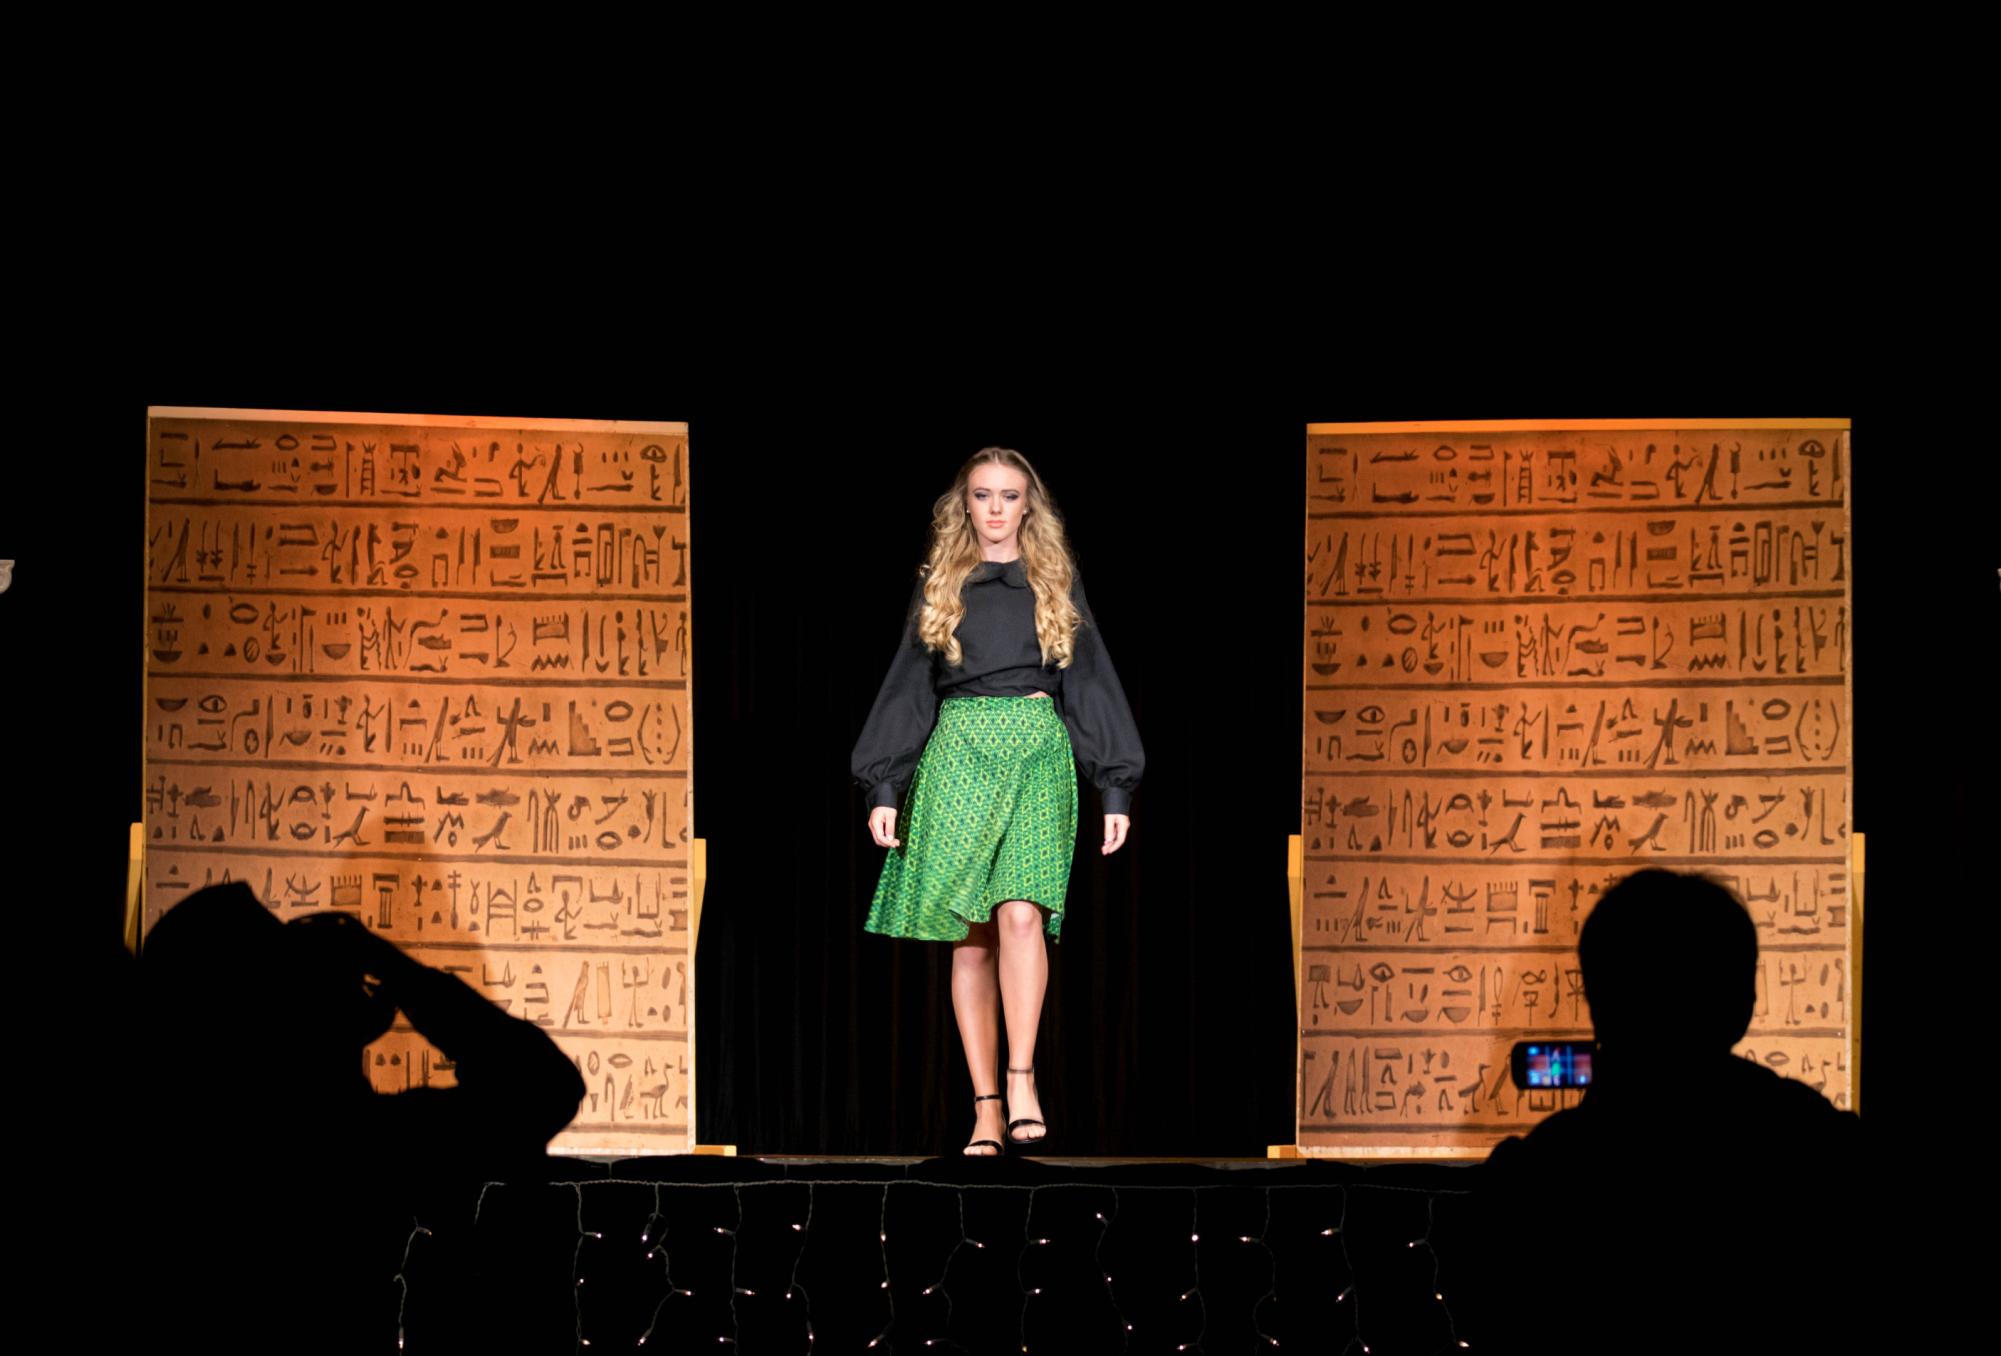 UNI’s Textiles and Apparel Program was designed to give students hands-on experience in the fashion and merchandising industry. One of these opportunities is in their annual CatWalk fashion show.